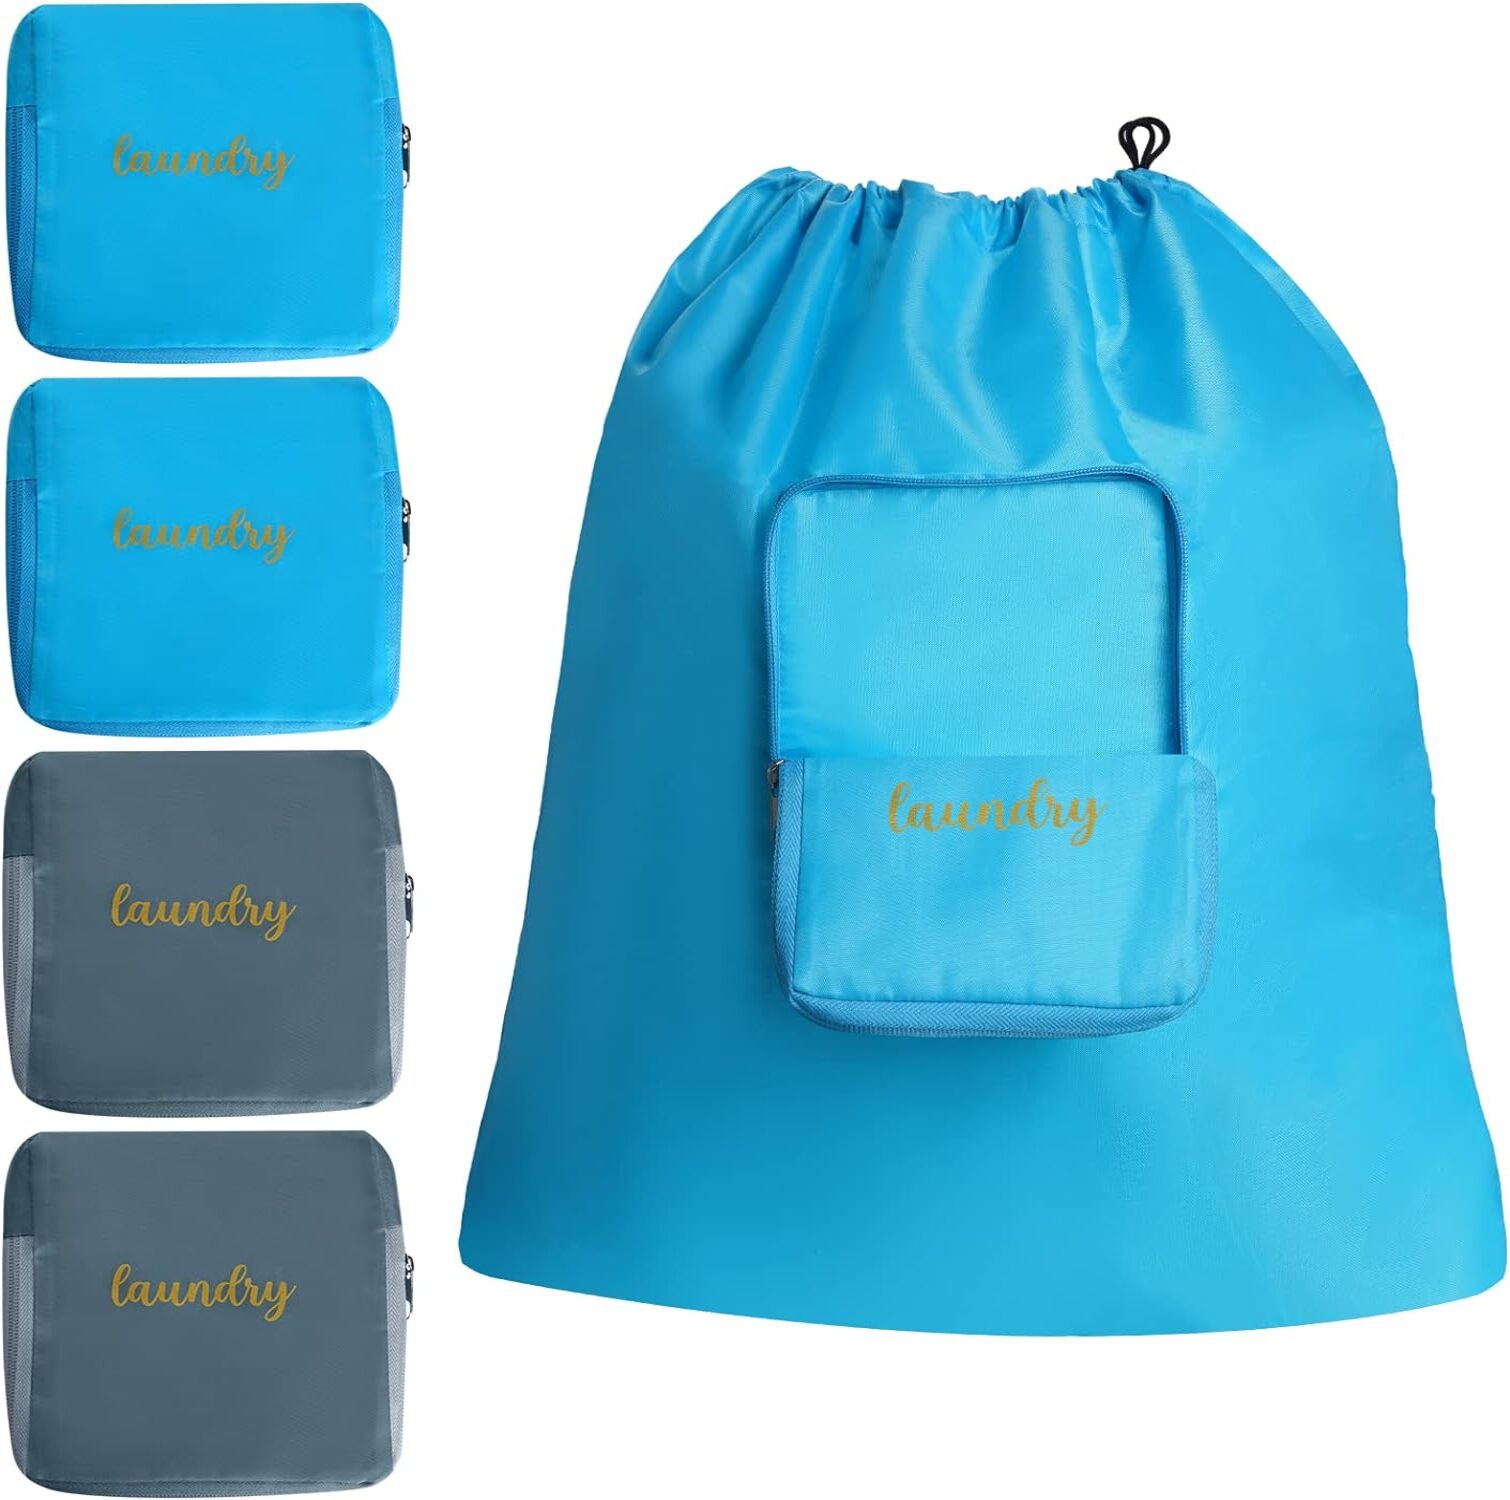 Travel Laundry Bag Wash Dry Fold Repeat Dirty Clothes Storage Bag